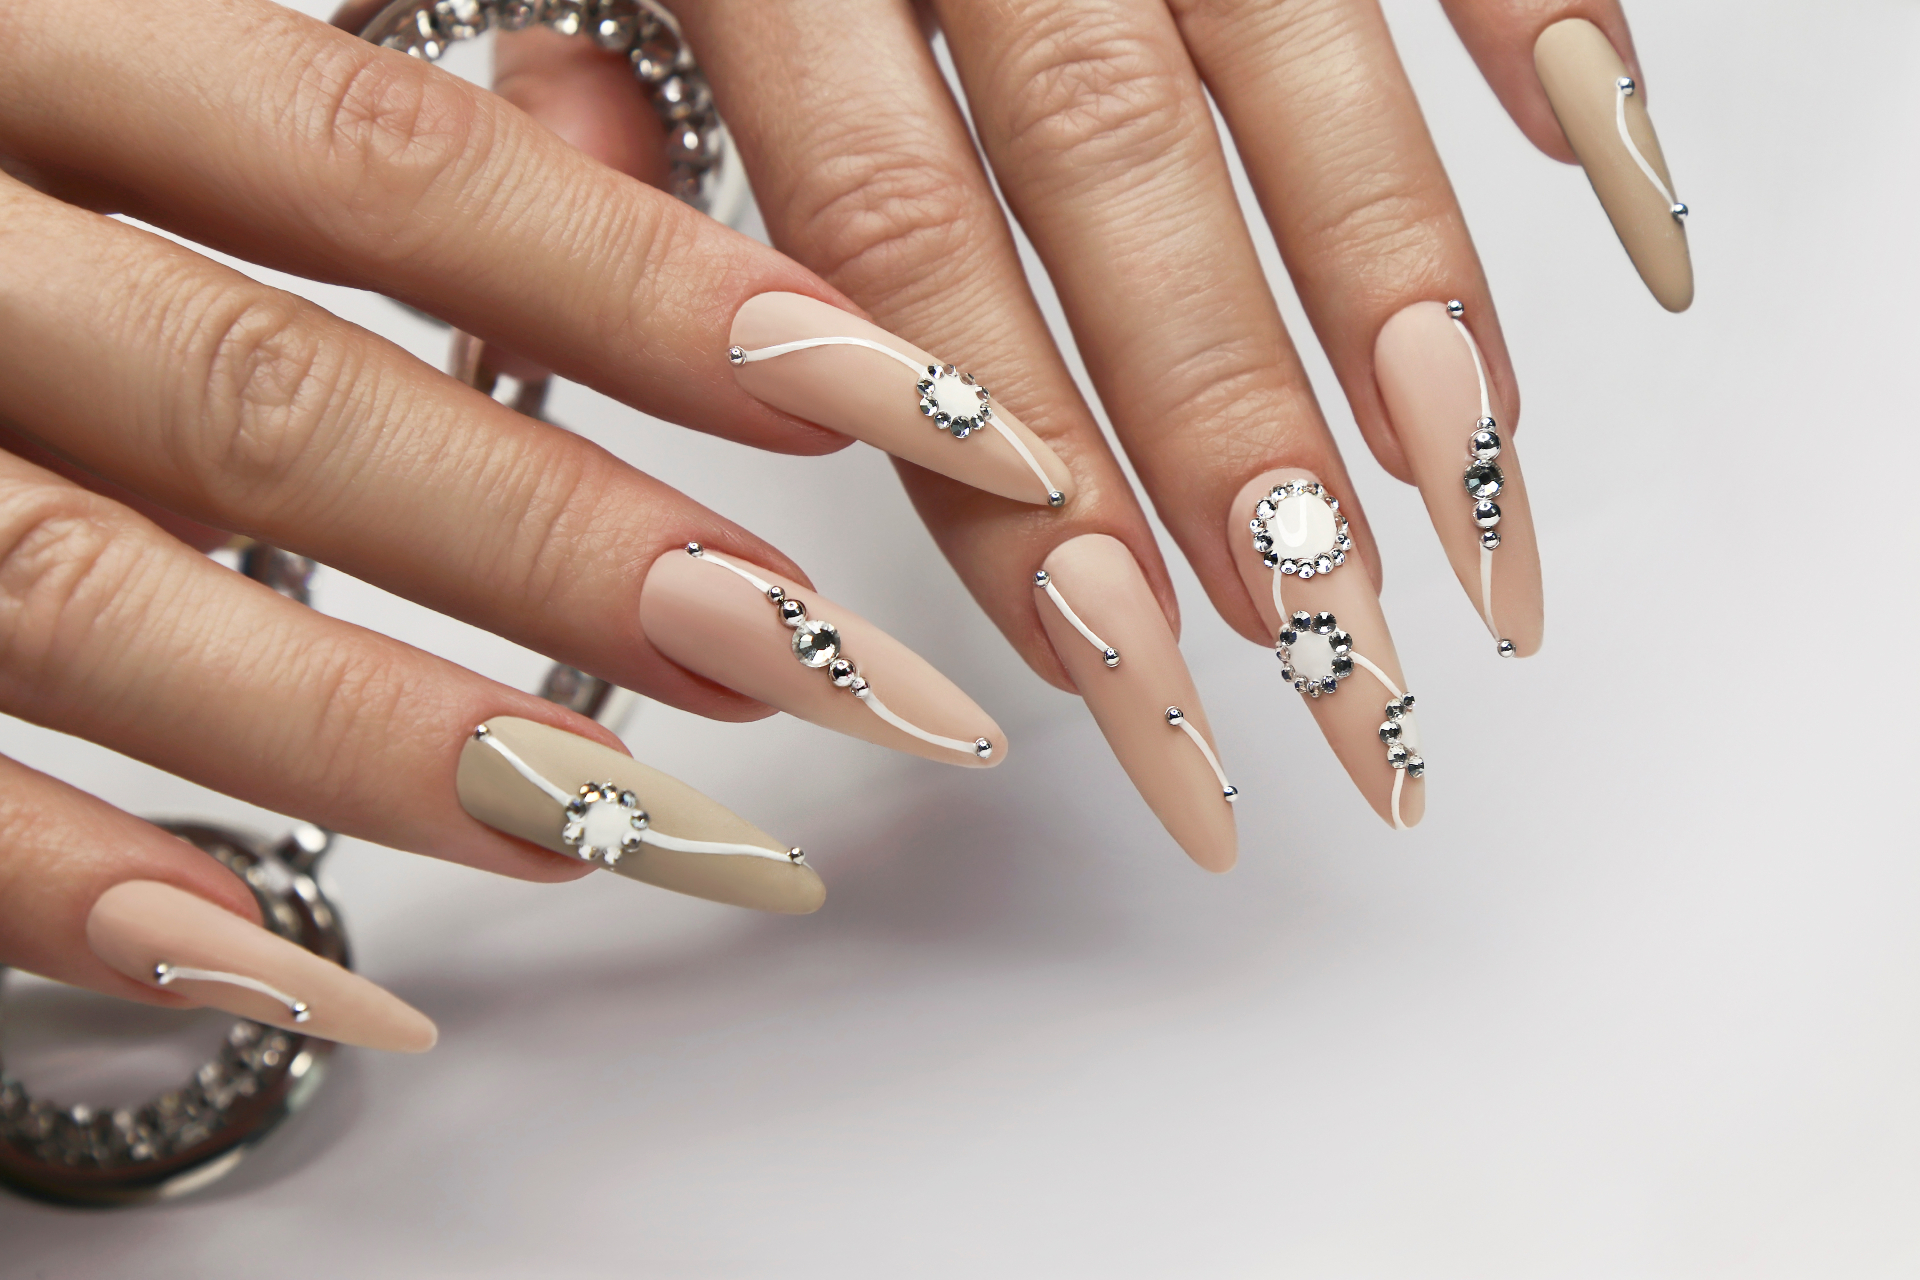 From an aesthetic point of view, any nail art idea is suitable for long nails